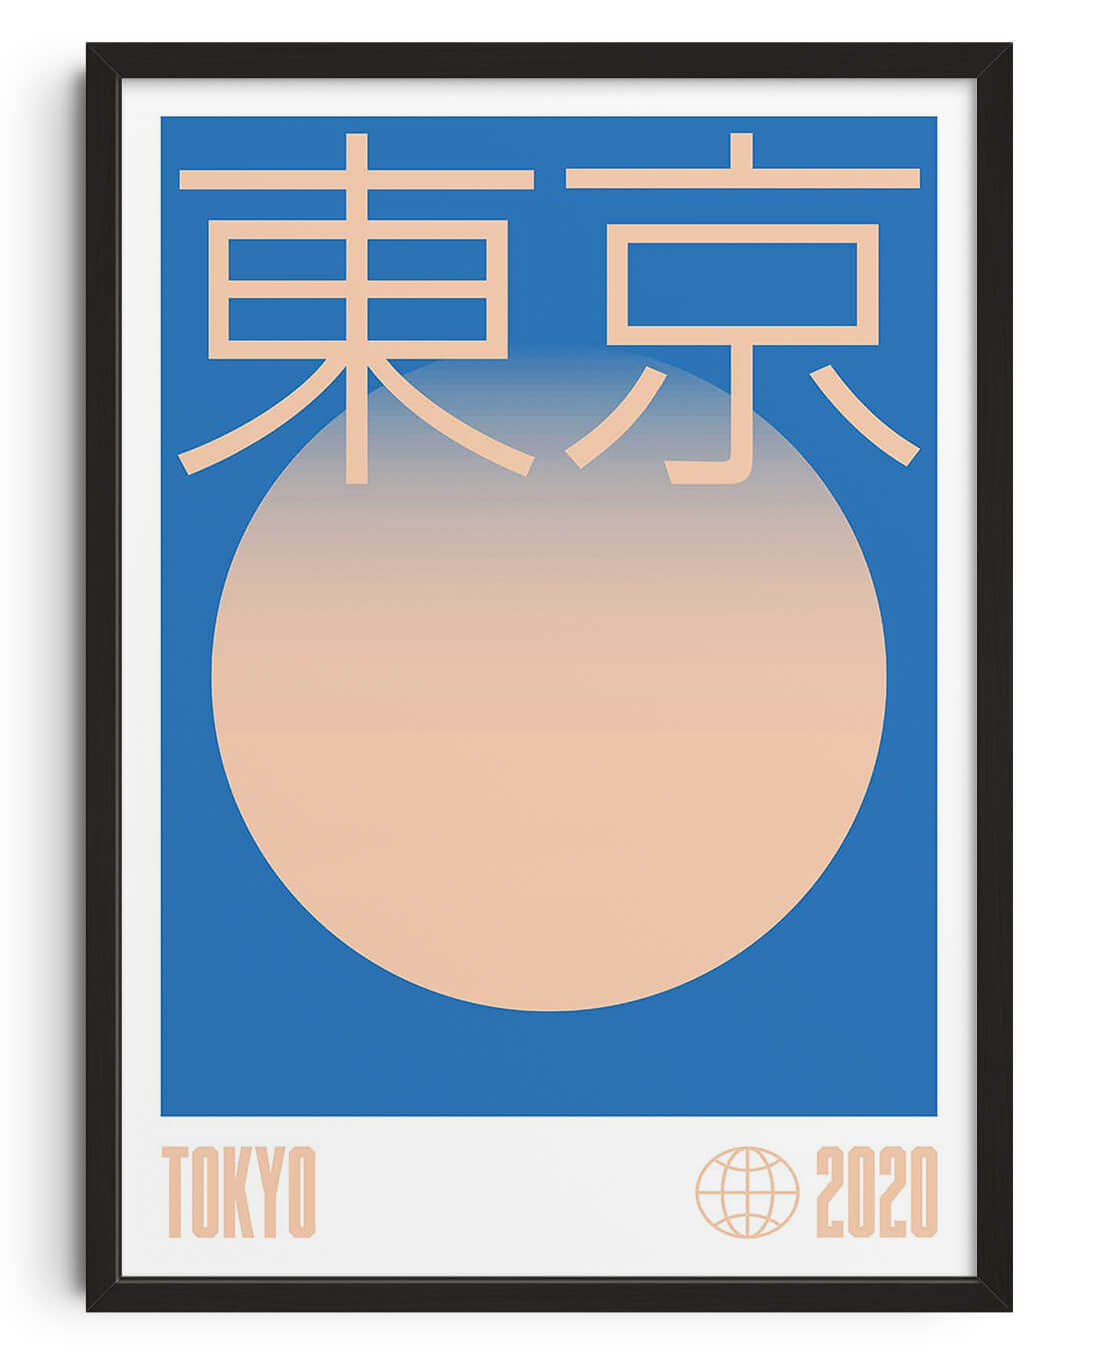 TOKYO by Matteus Faria contemporary wall art print from DROOL